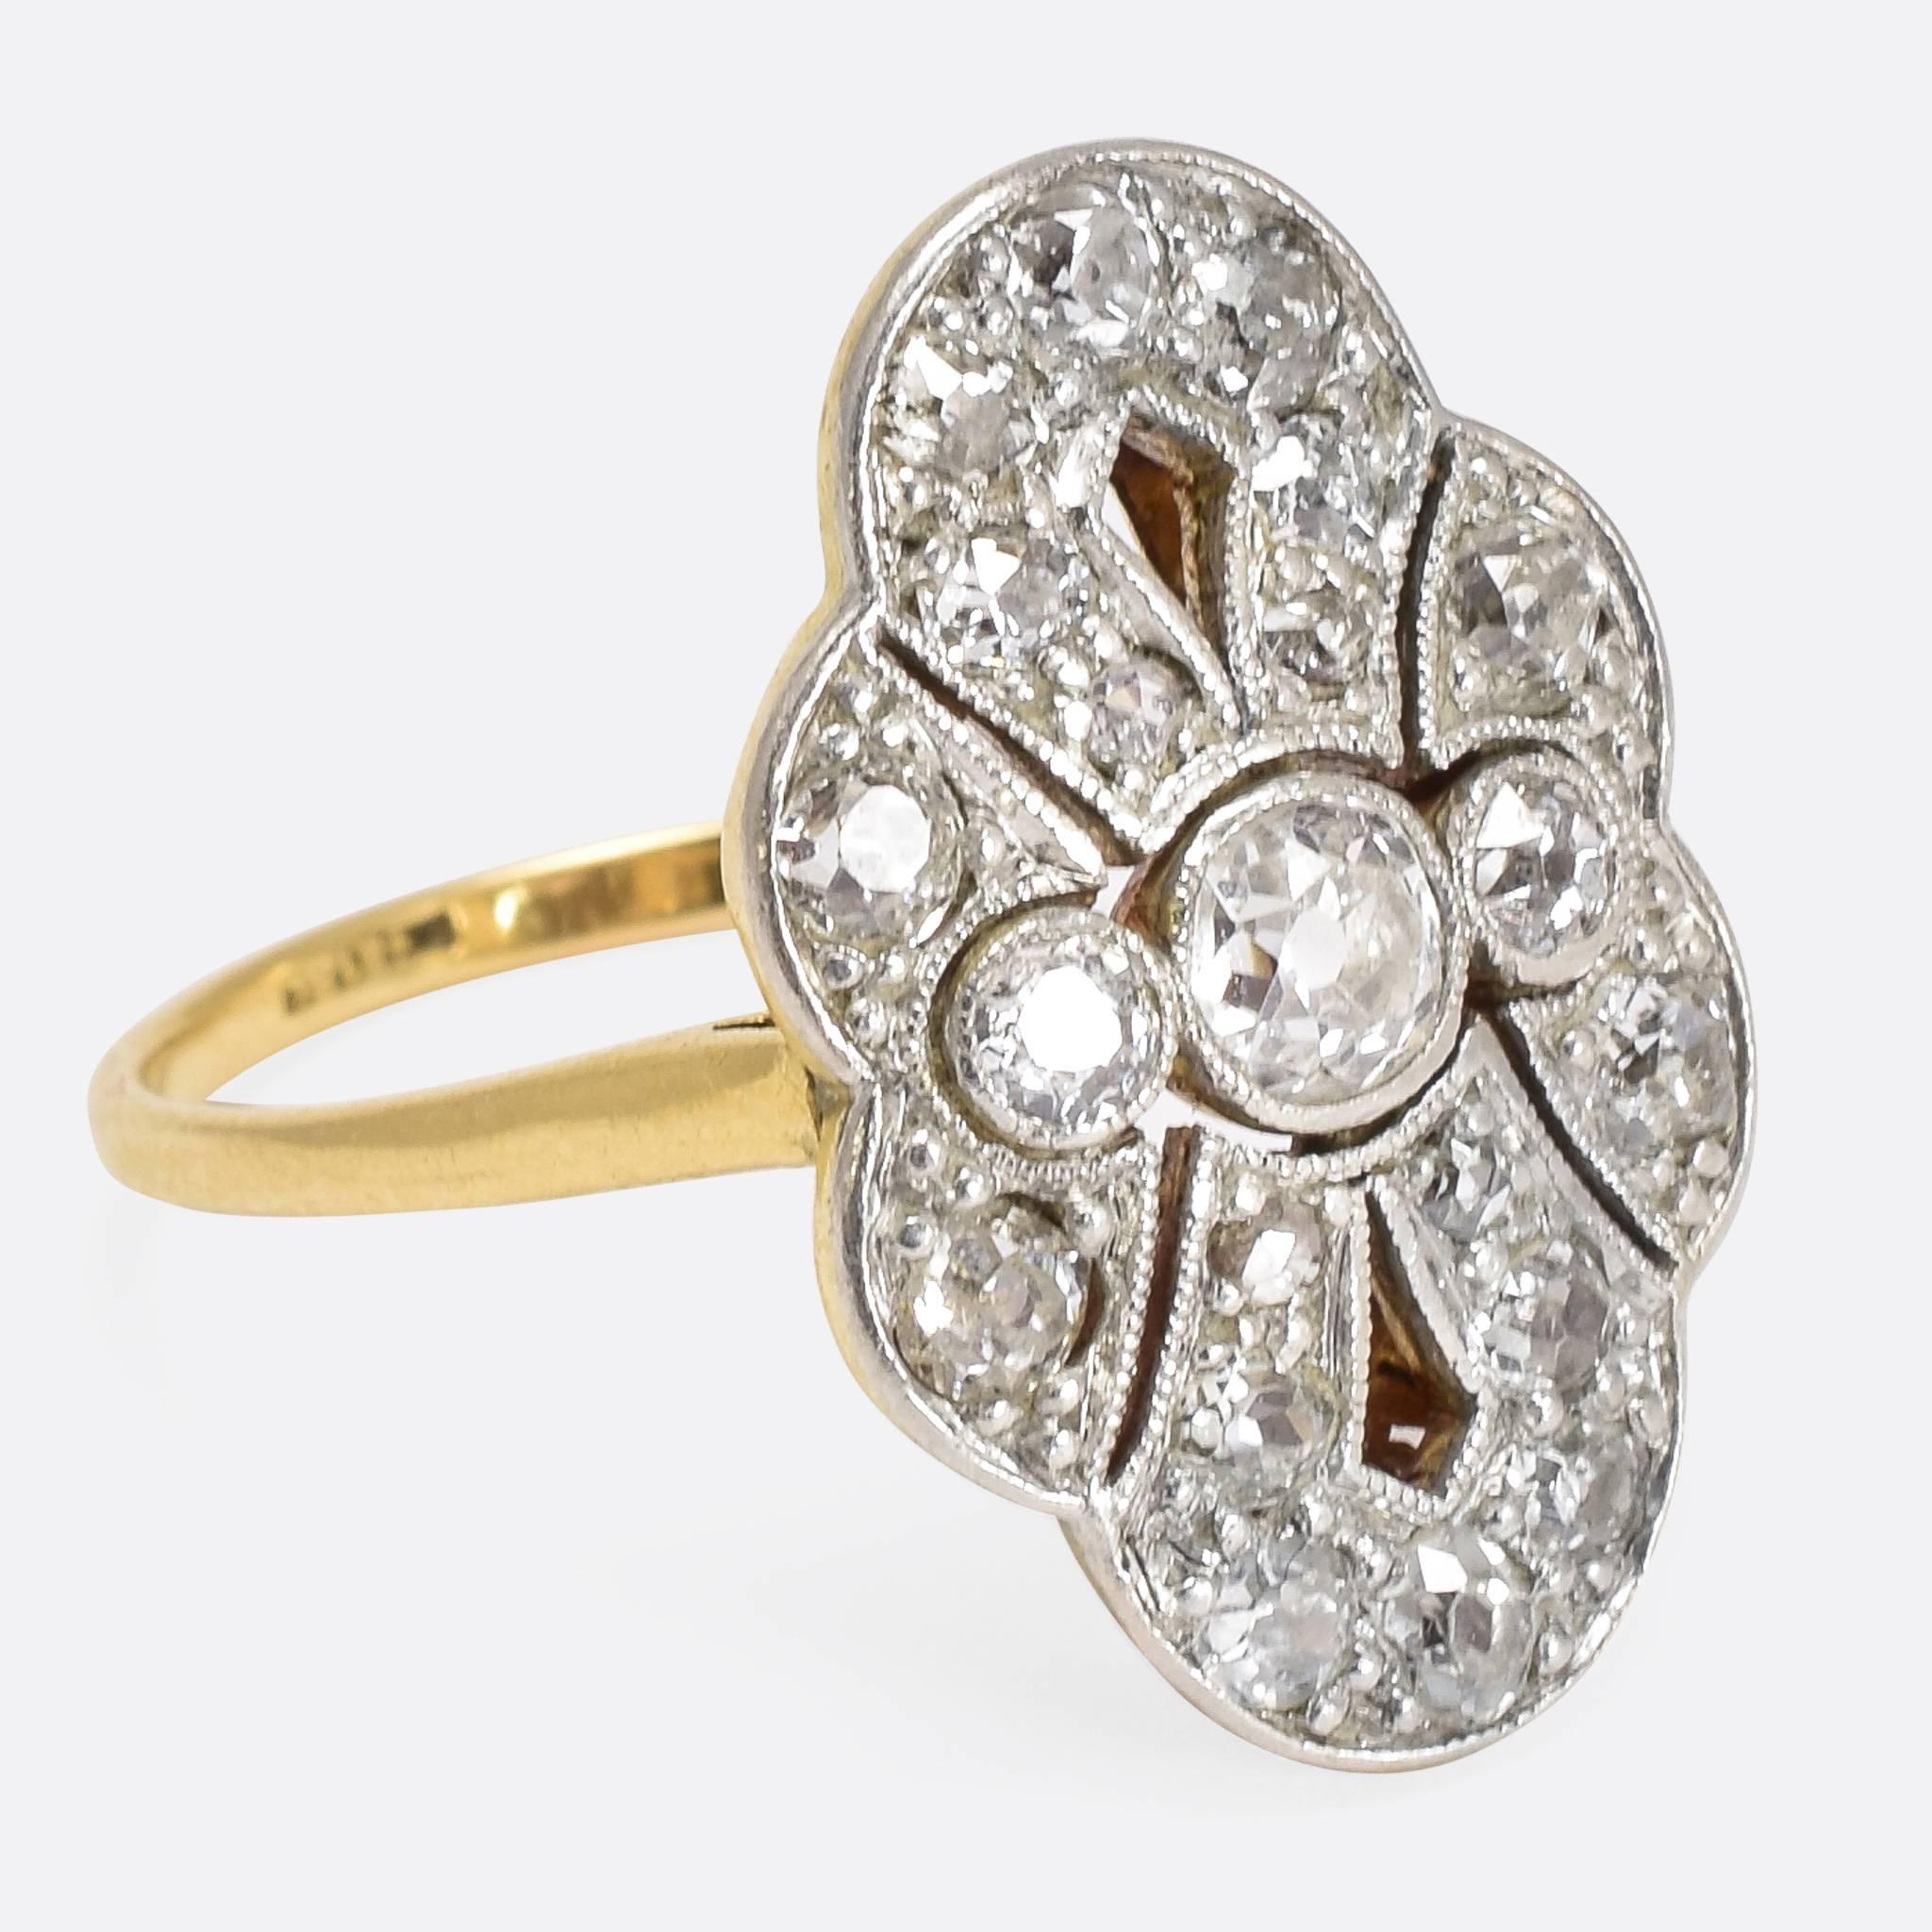 This fabulous antique ring dates to the early 20th Century. The marquise shaped head is set with around 1.1ctw of old cut diamonds, in millegrained platinum settings. The back of the head features beautiful openwork, and the band is modelled in 18ct